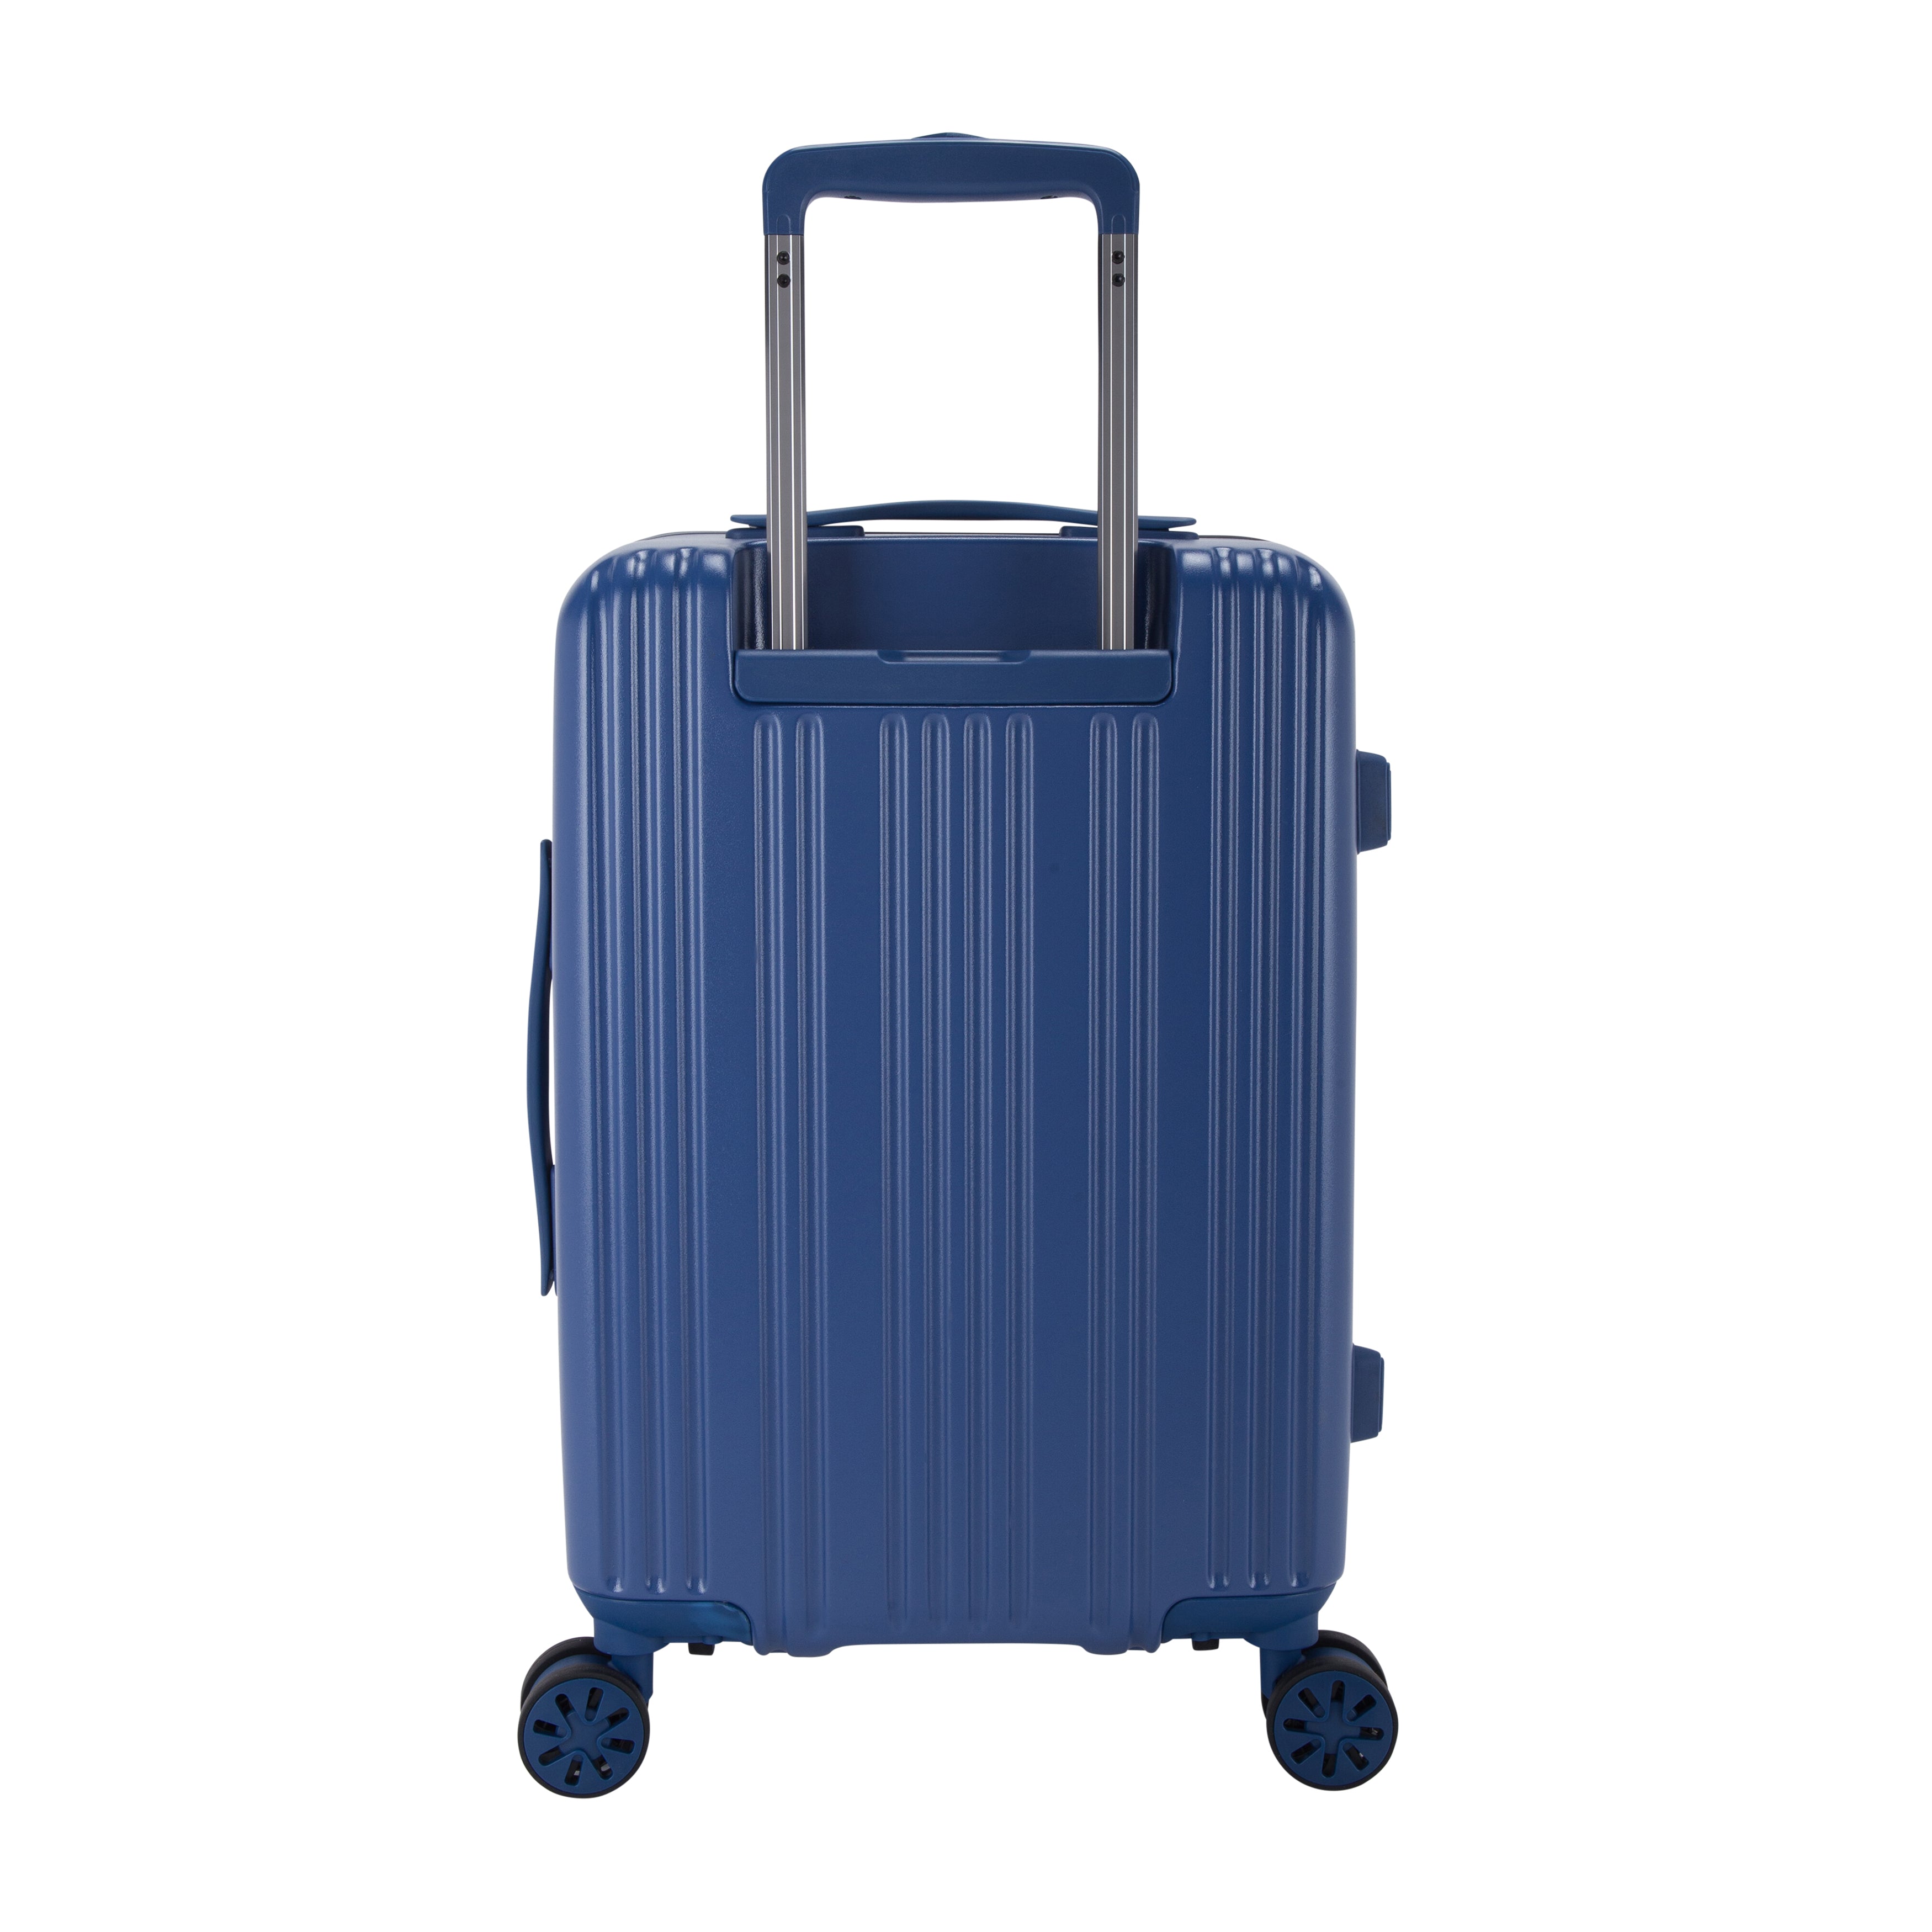 Pierre Cardin Suitcase Front Pocket Design Carry On, Navy